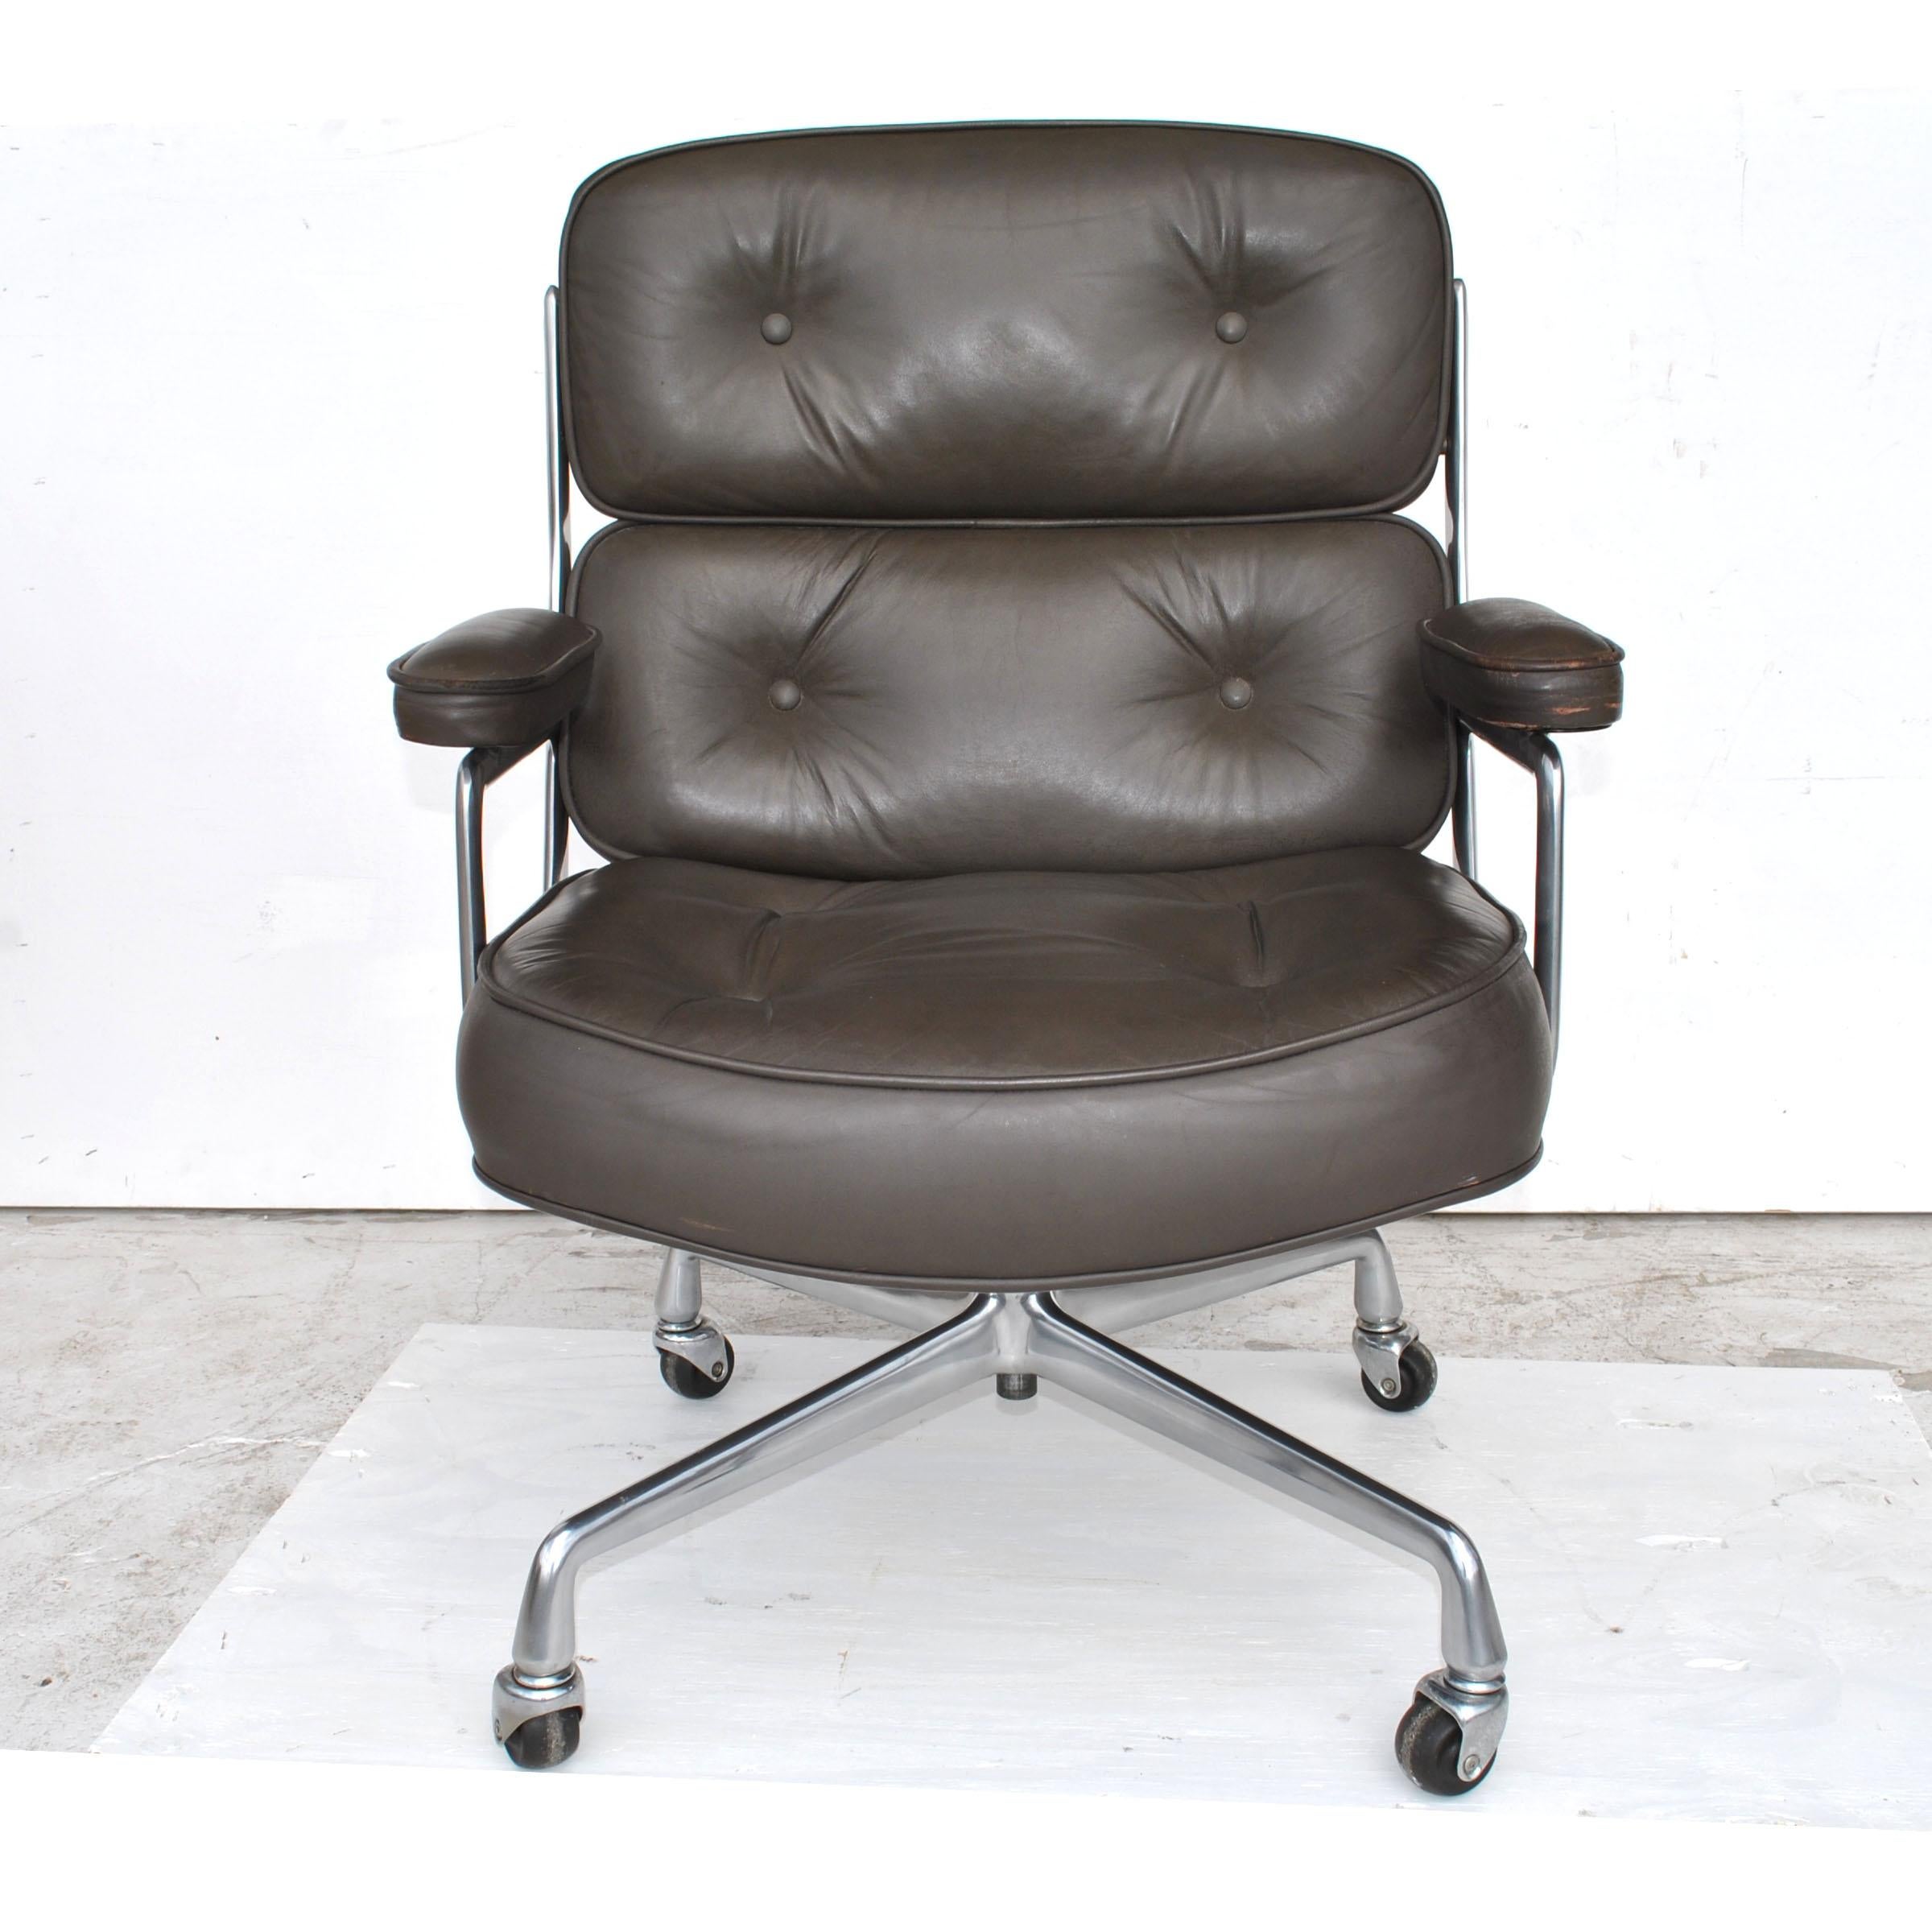 American 1 Herman Miller Time Life Office Executive Leather Chair 4-Star Base